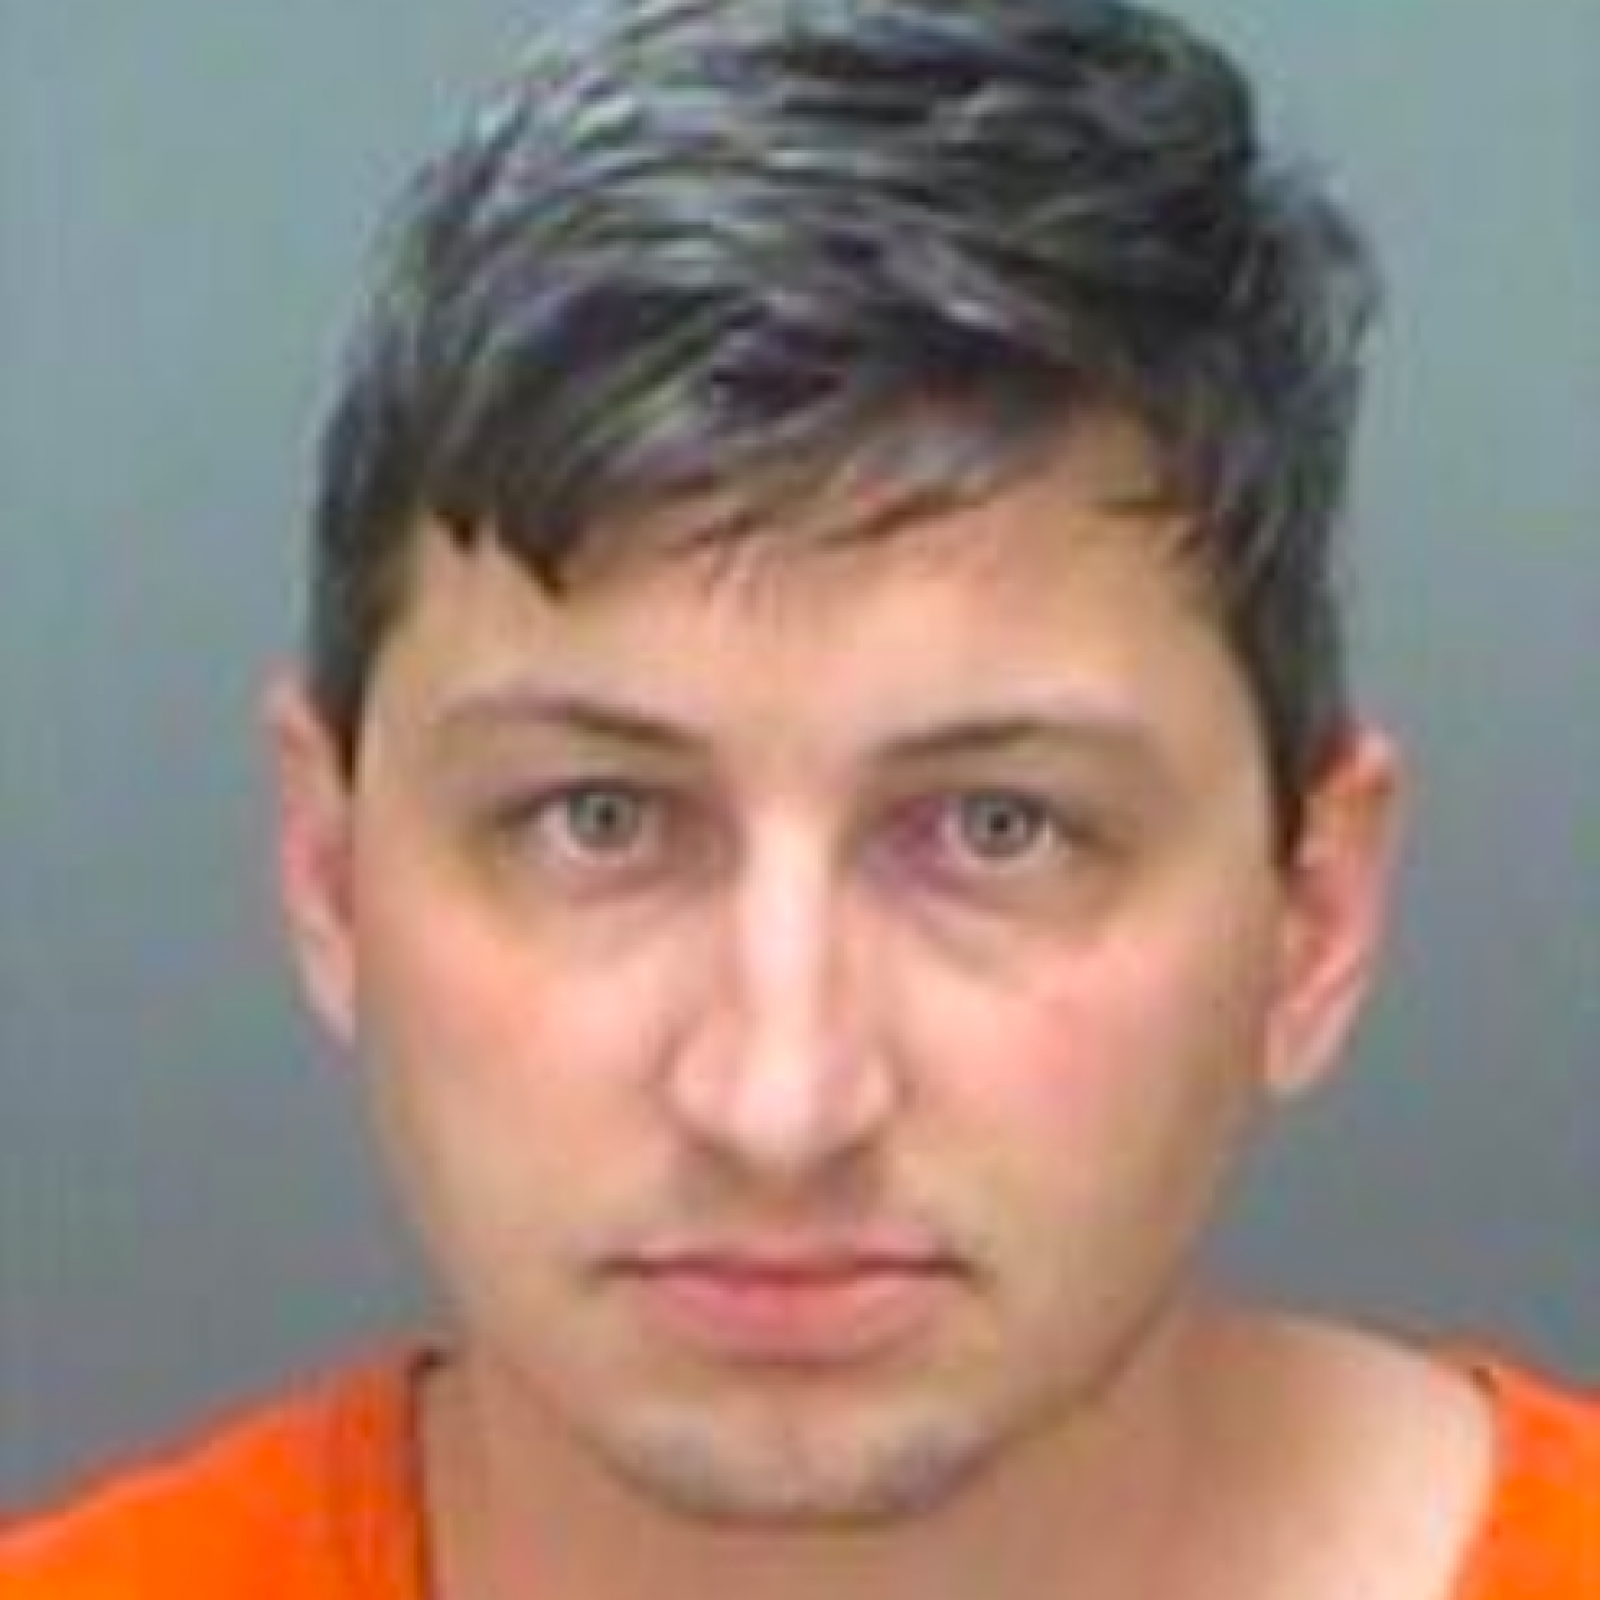 Toddler Daughter Porn - Florida Man Accused of Making Child Porn With 2-Year-Old Daughter, Posting  on Dark Web